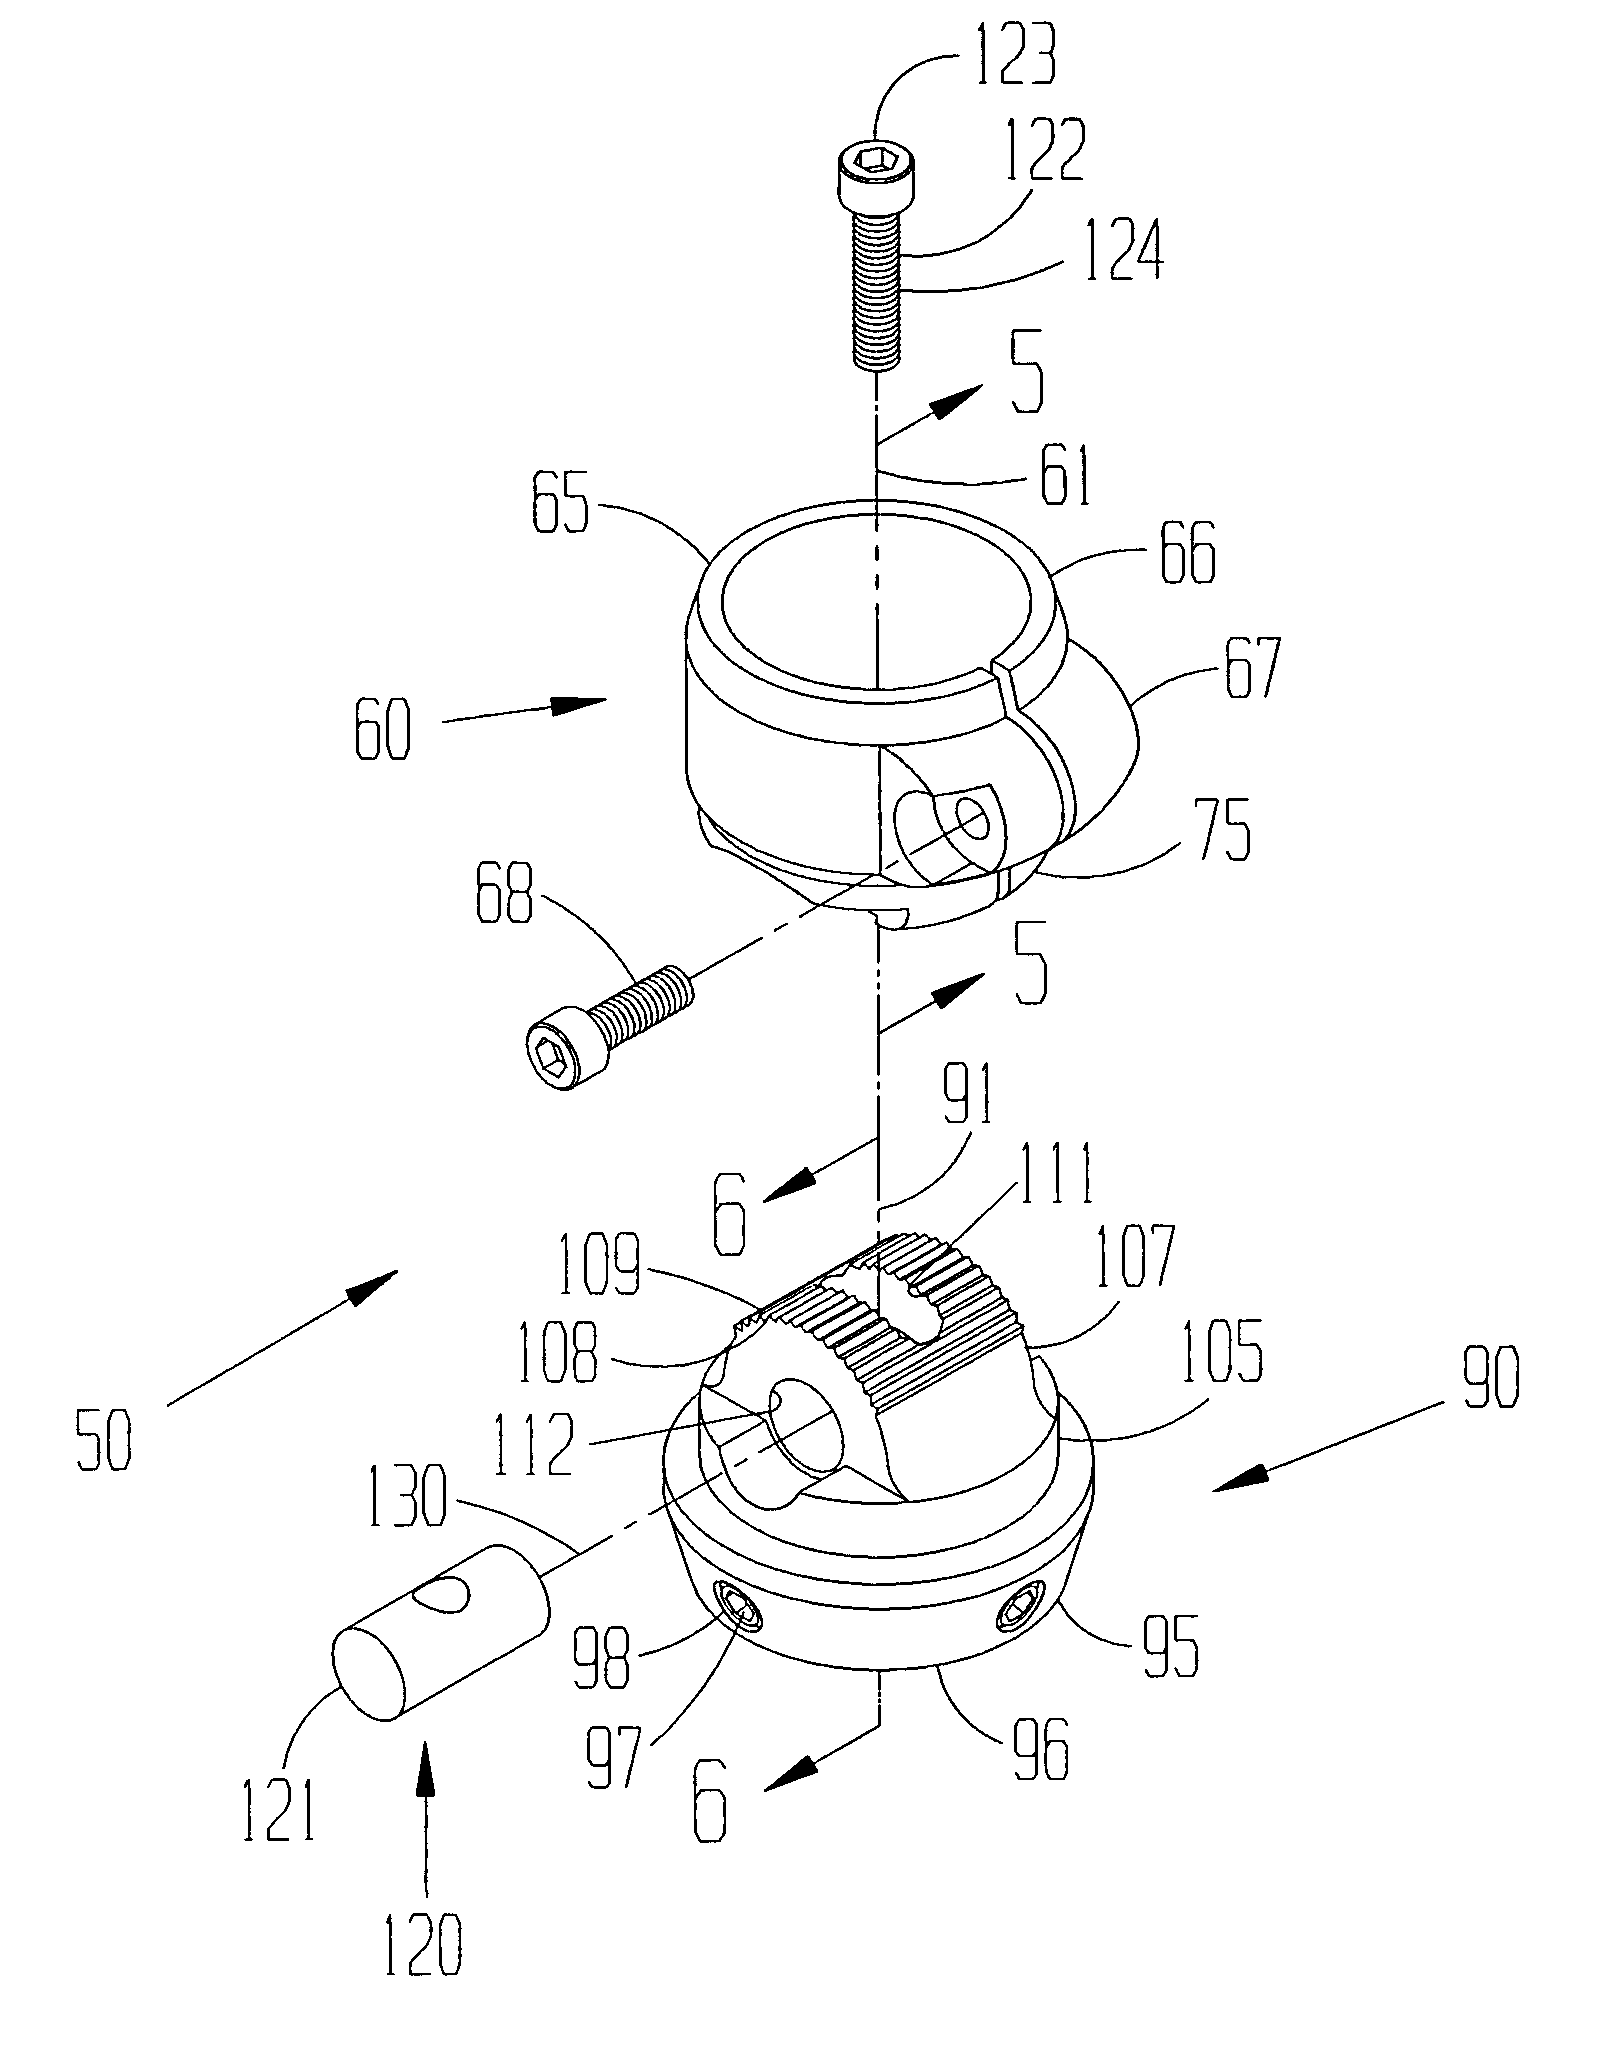 Device for angularly coupling prosthetic components